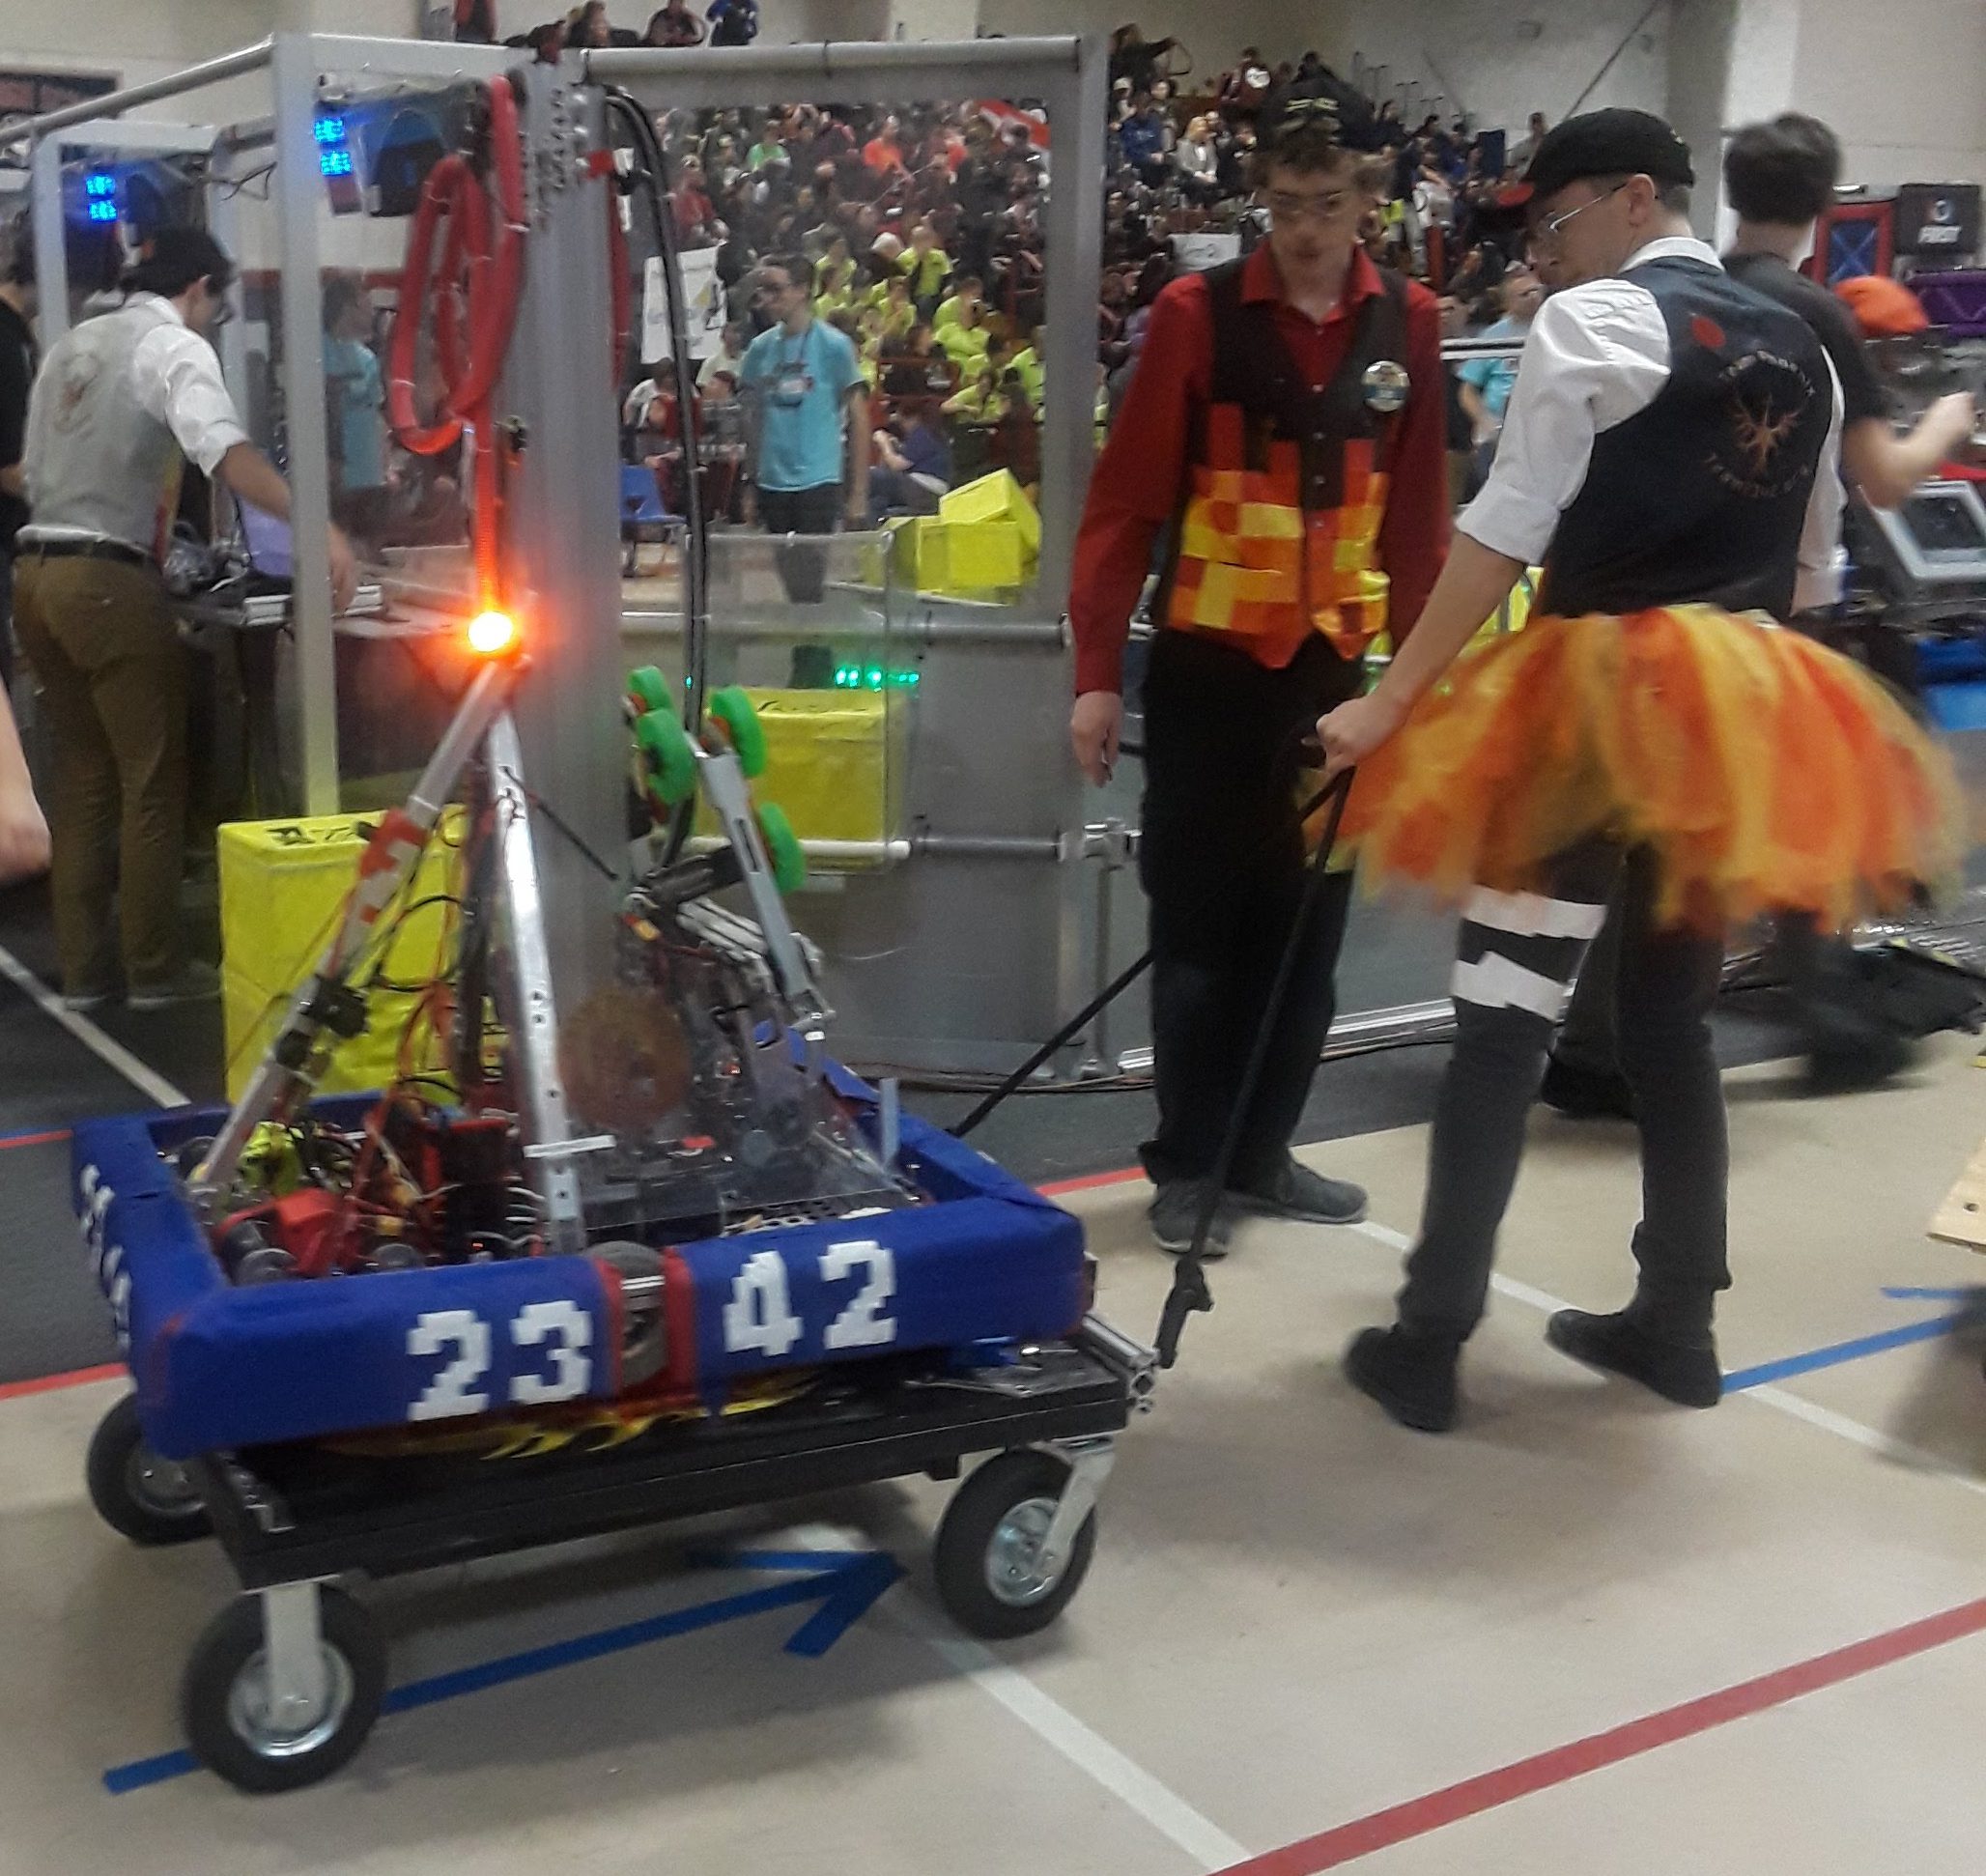 Loading the robot onto the field while looking dapper